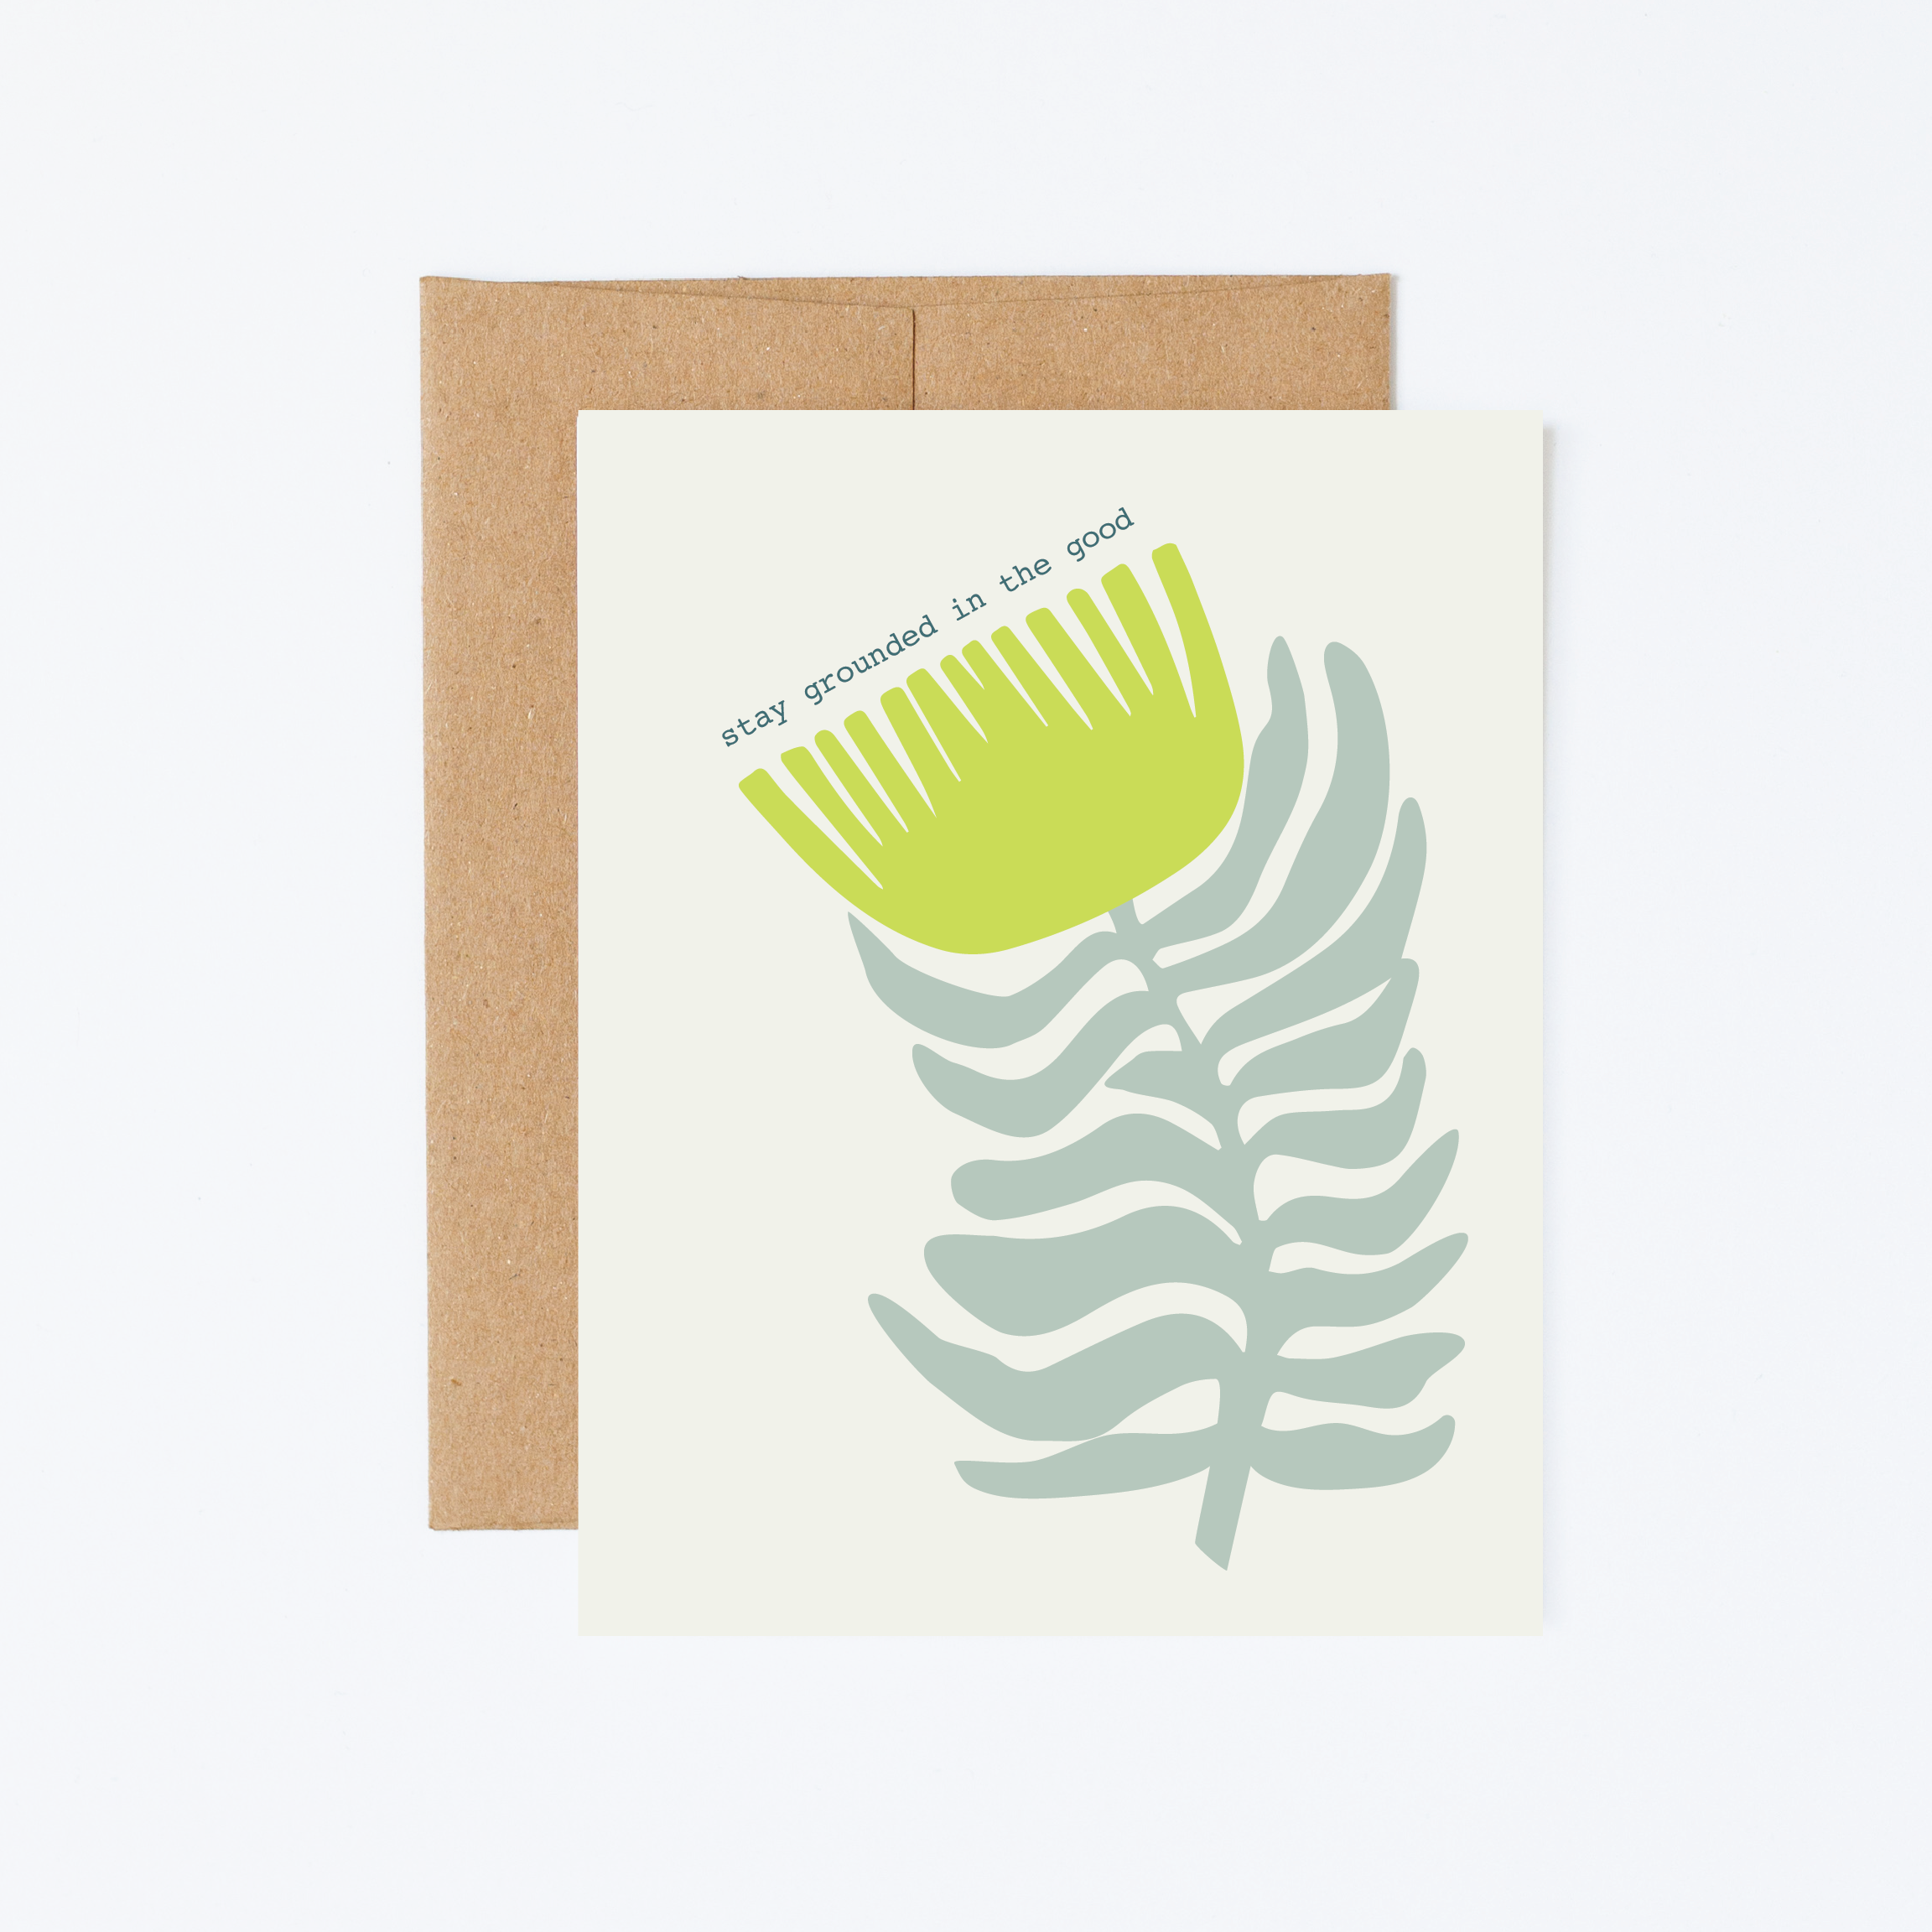 Stay Grounded In The Good Greeting Card